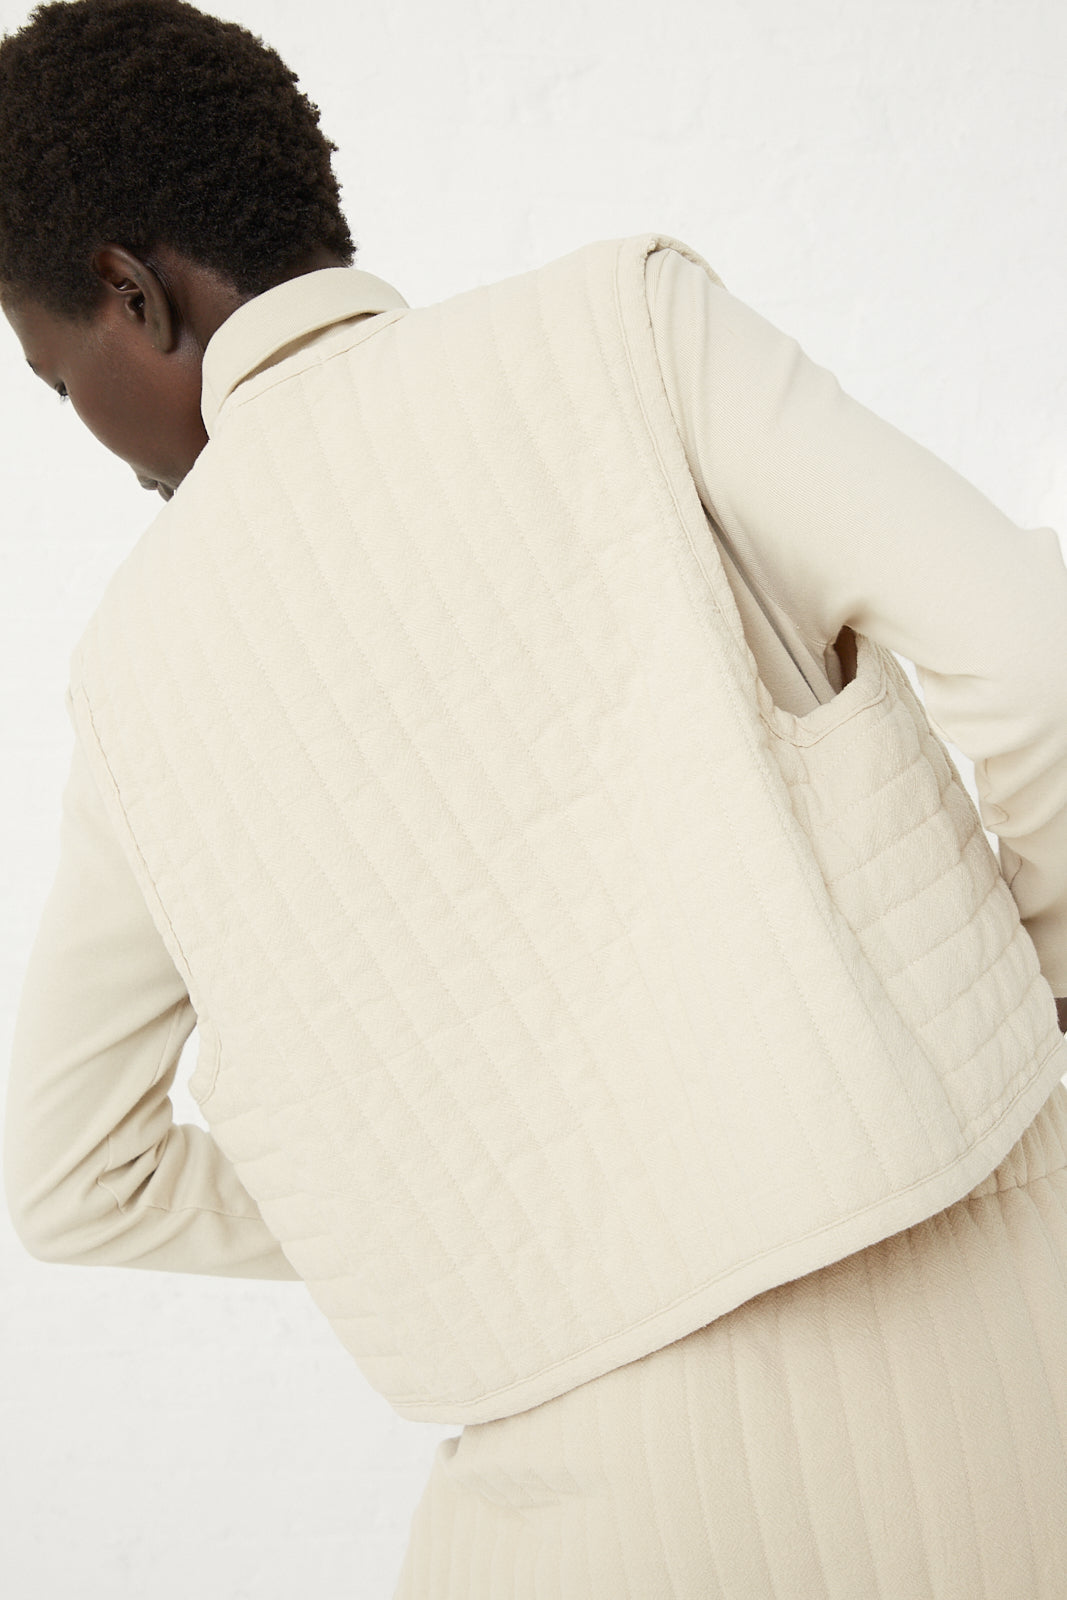 The back of a woman wearing a white quilted vest from Black Crane, an Los Angeles-based label.